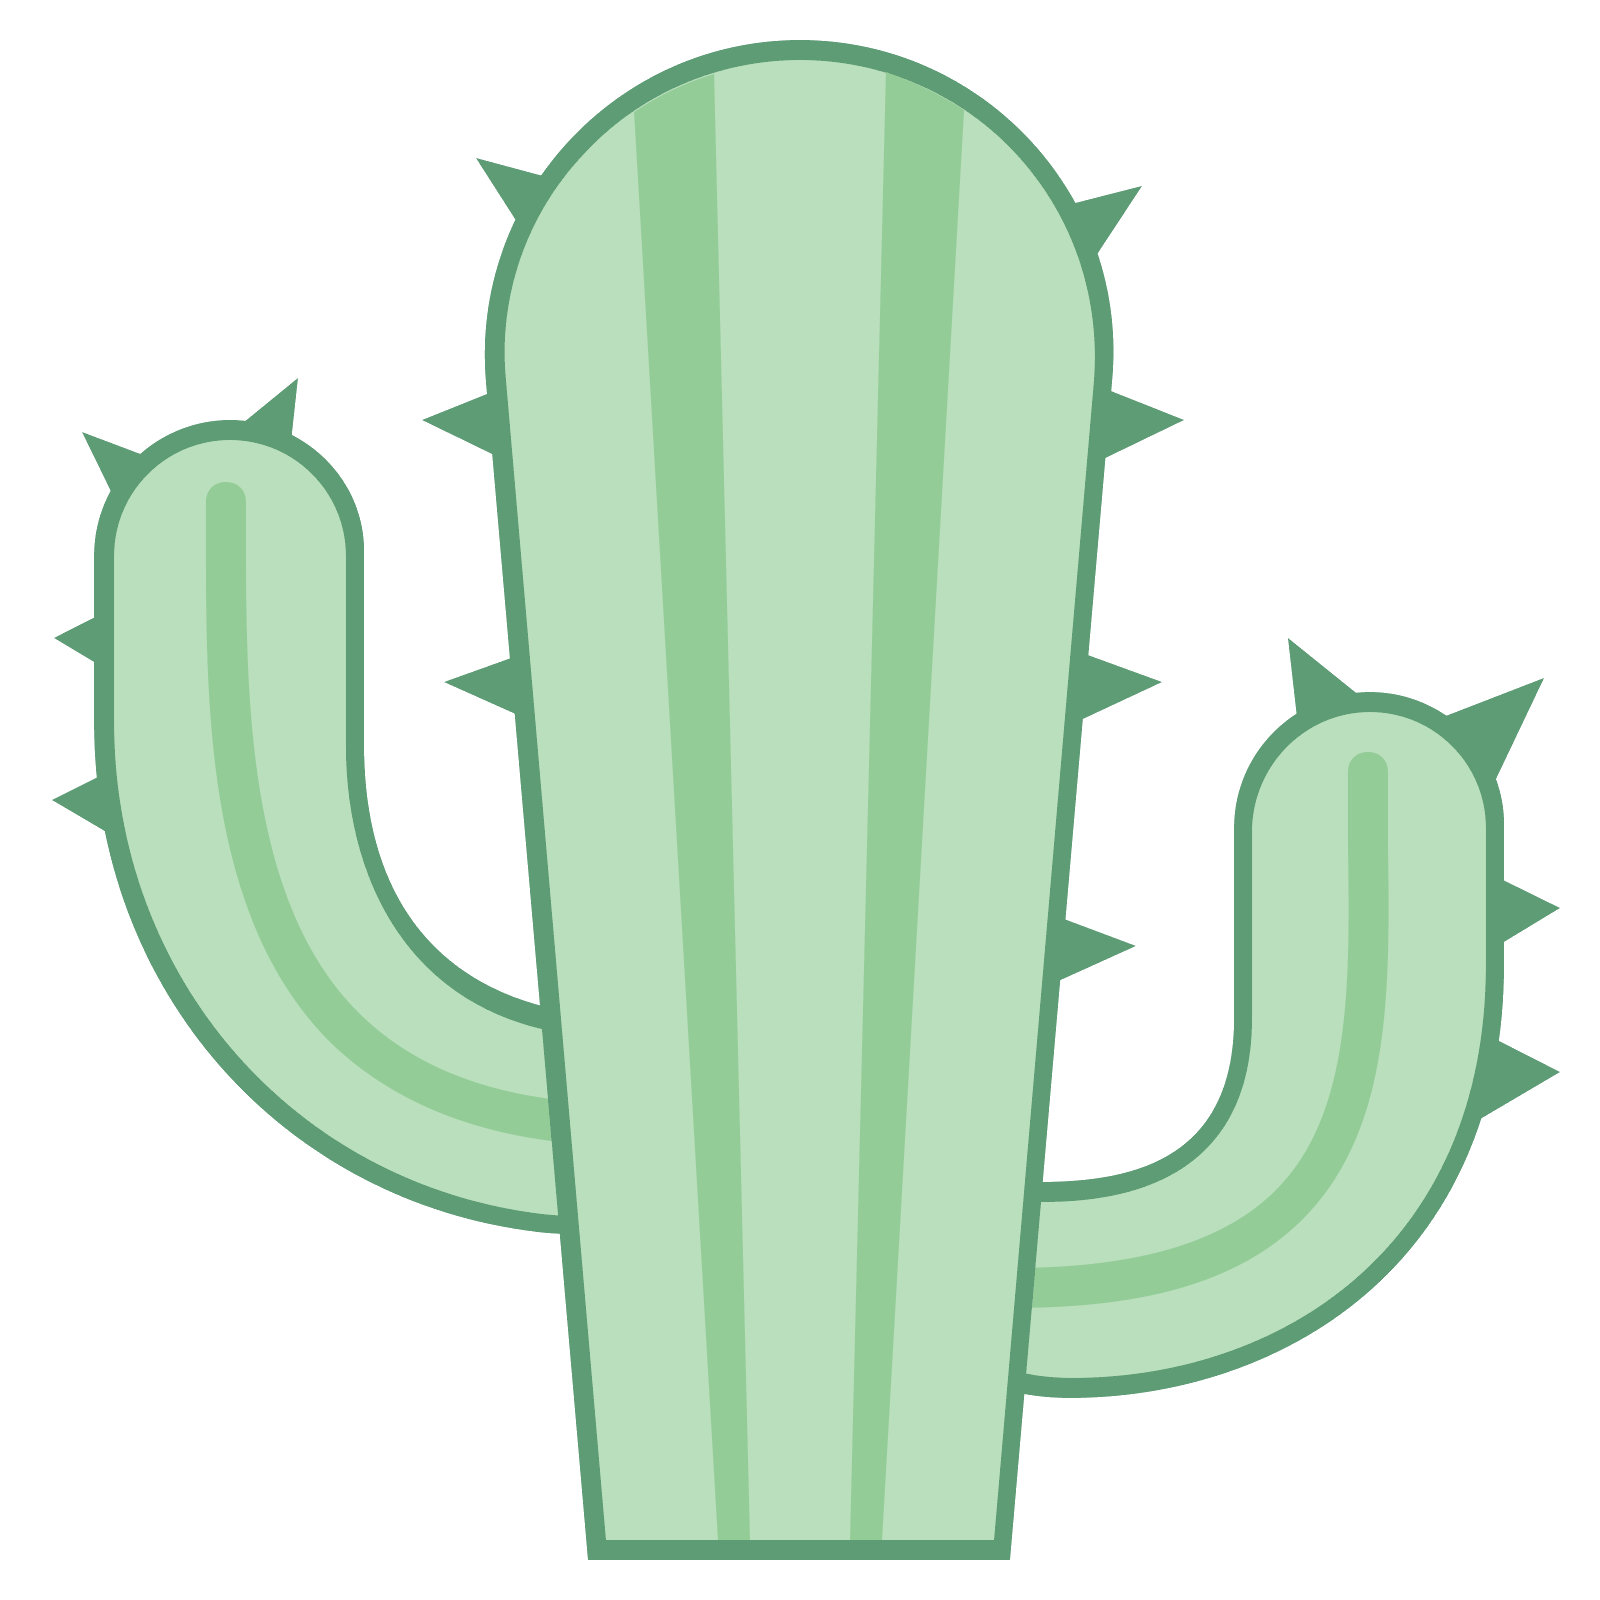 Cactus Clipart Png Free Logo Image